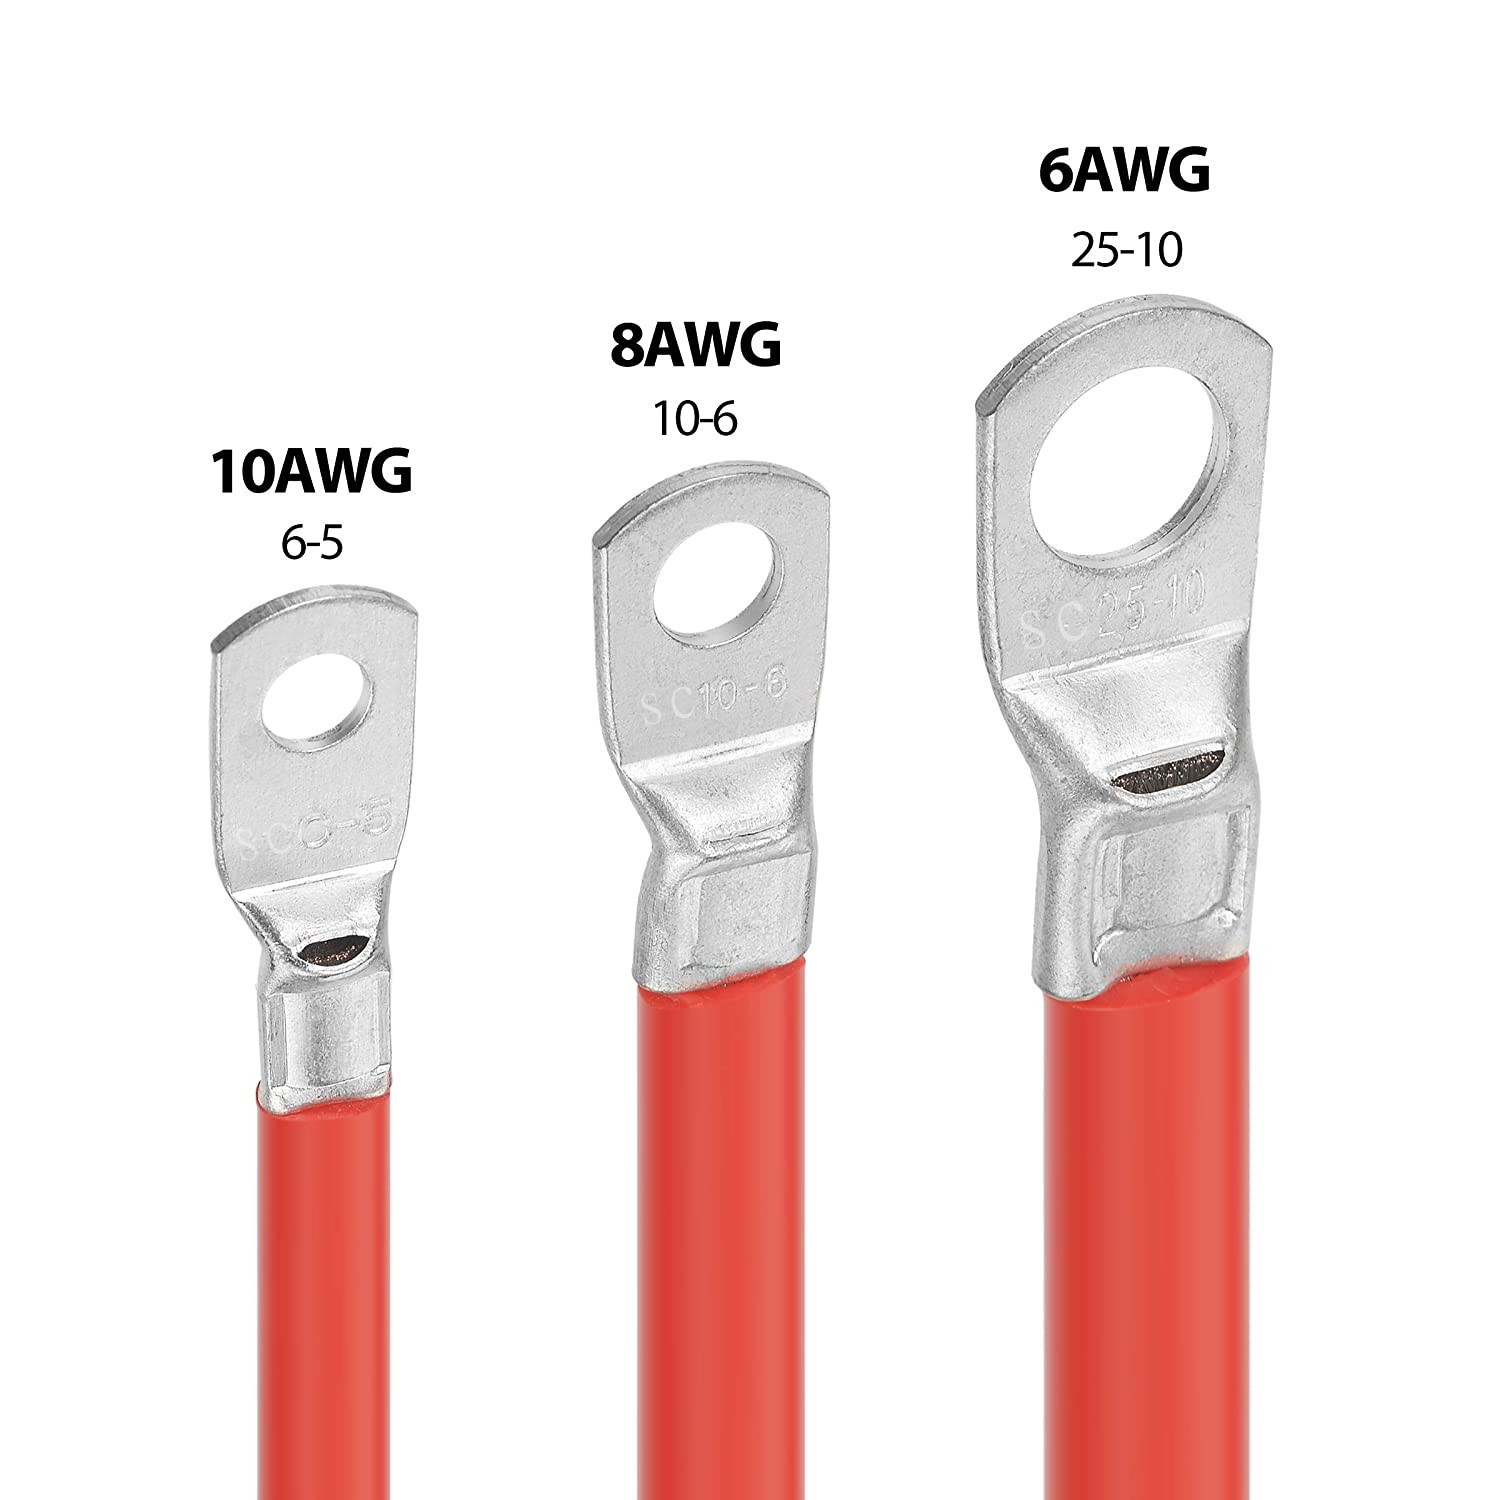 6AWG cable